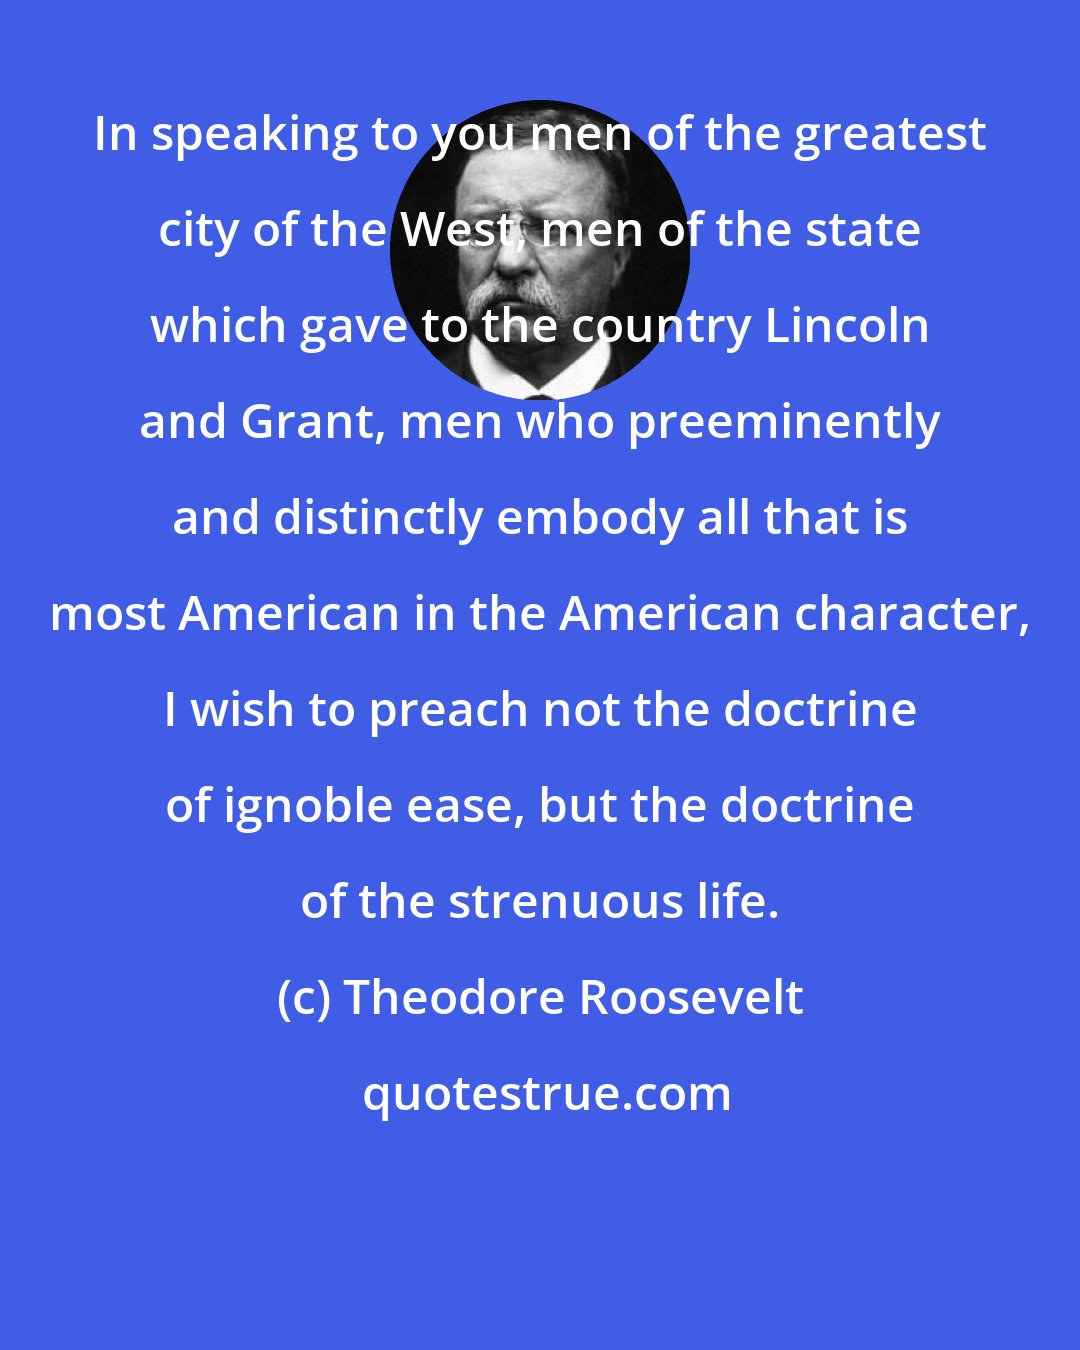 Theodore Roosevelt: In speaking to you men of the greatest city of the West, men of the state which gave to the country Lincoln and Grant, men who preeminently and distinctly embody all that is most American in the American character, I wish to preach not the doctrine of ignoble ease, but the doctrine of the strenuous life.